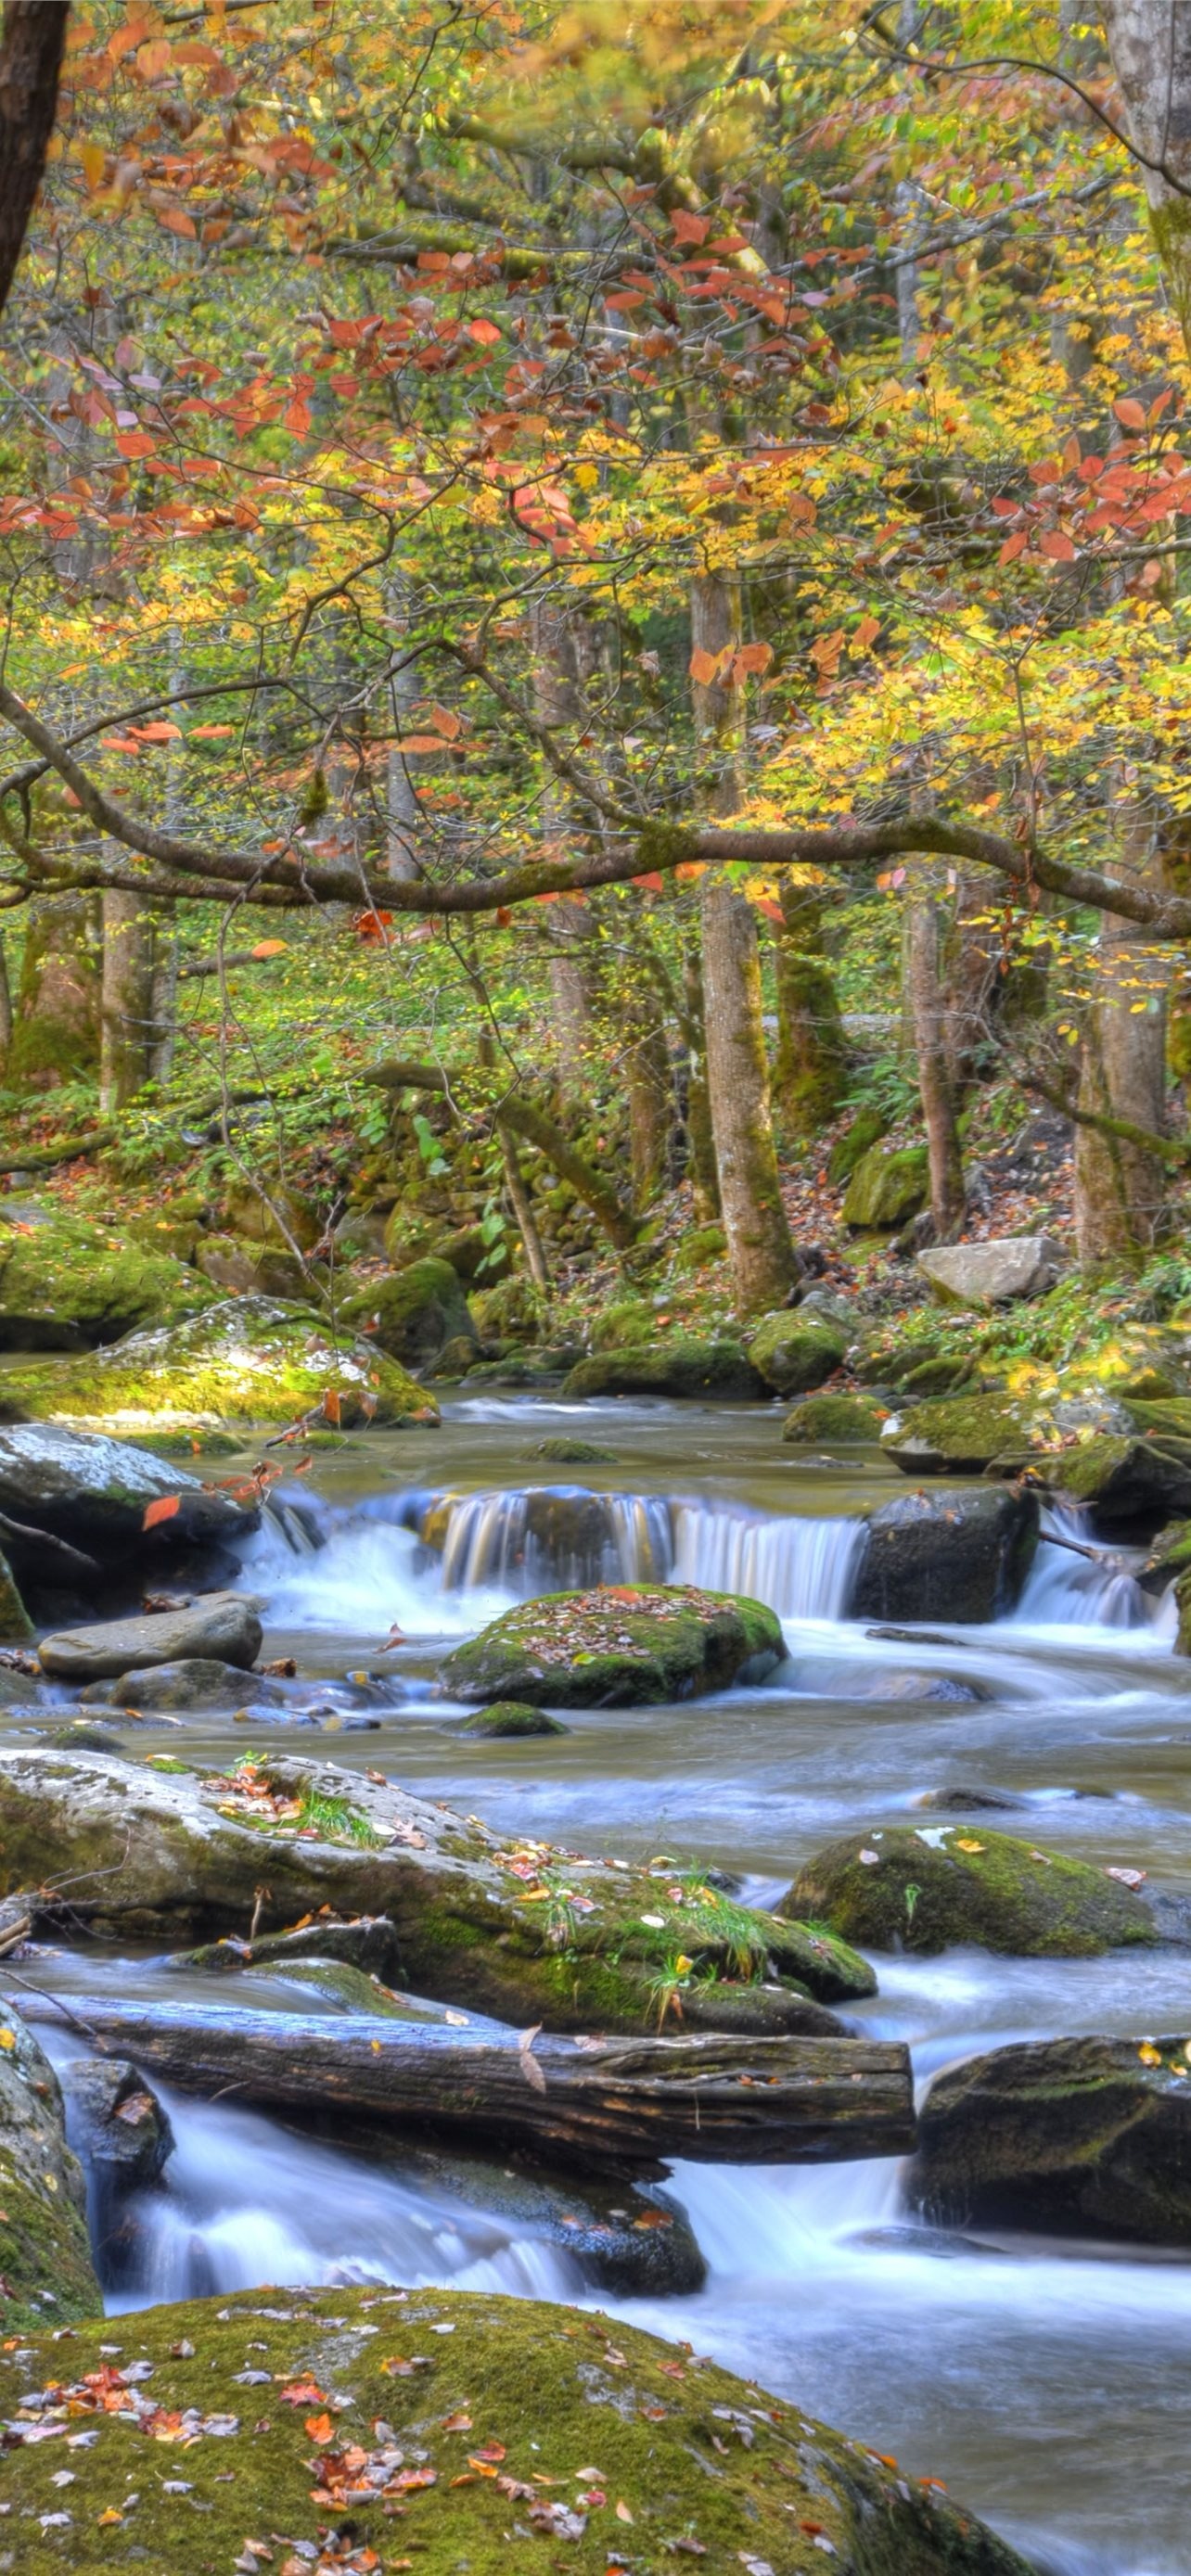 Great Smoky Mountains, National Park, iPhone wallpapers, Free download, 1290x2780 HD Handy